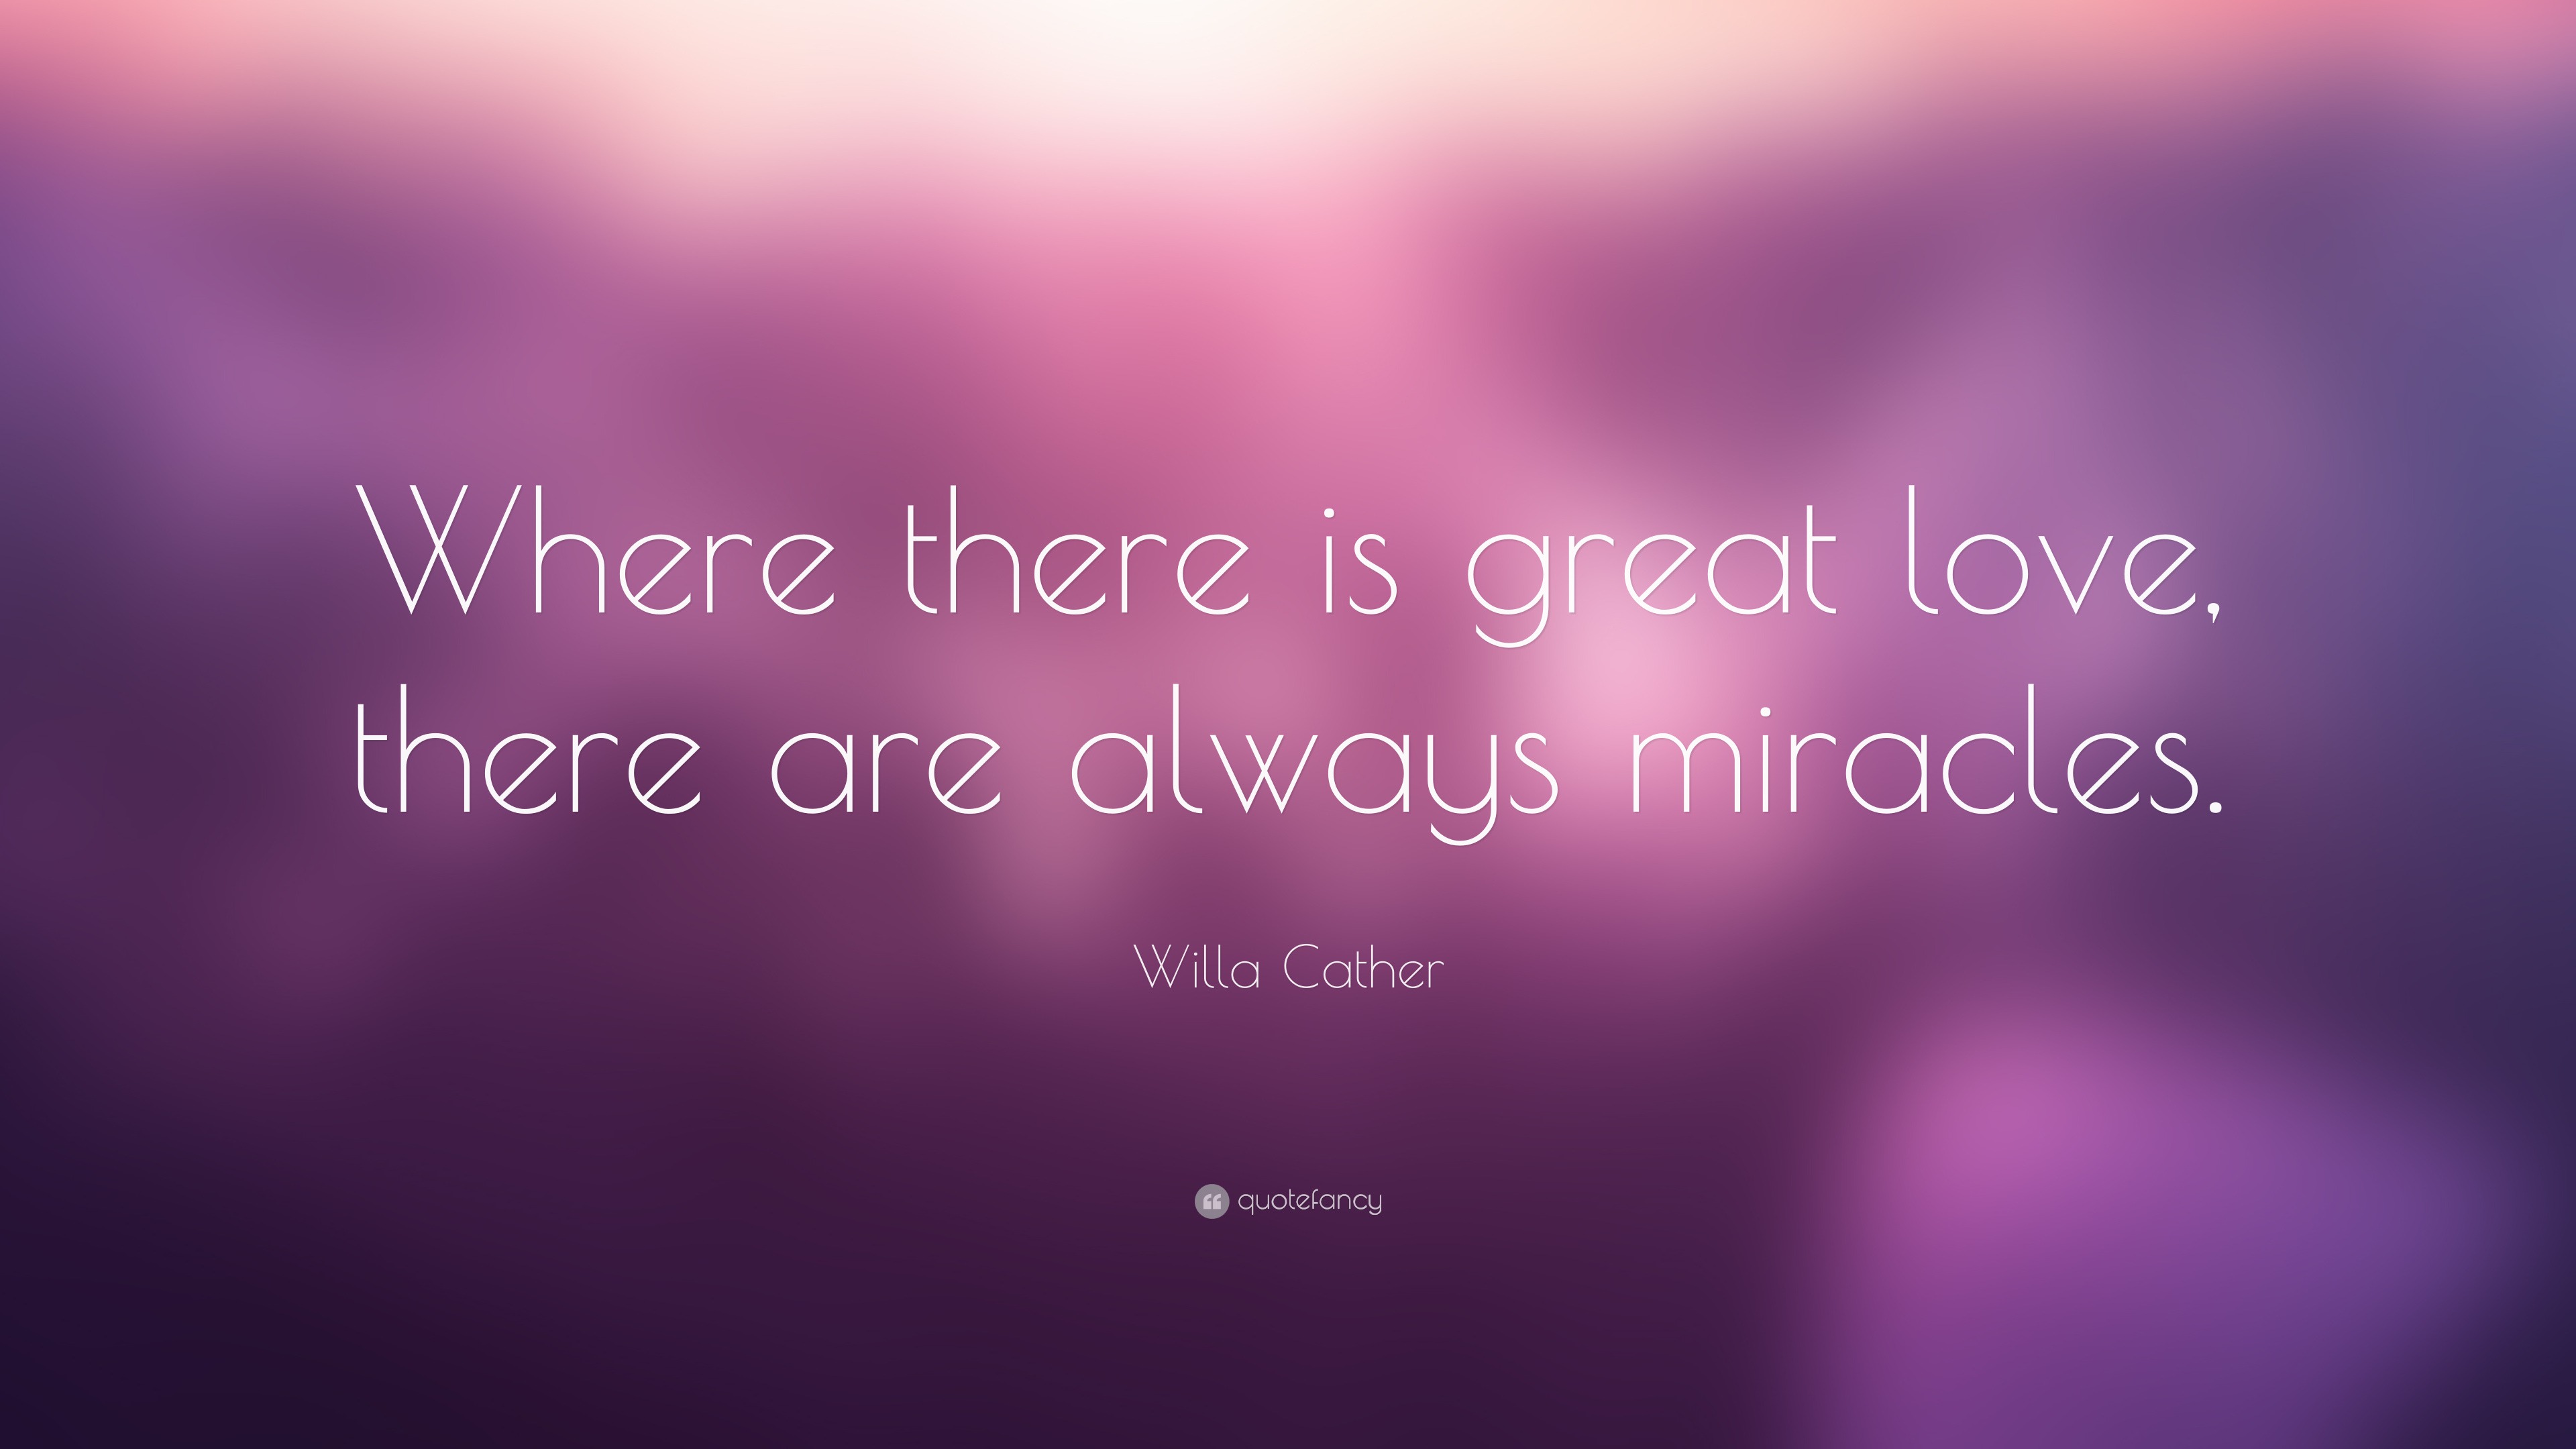 Willa Cather Quote: “Where there is great love, there are always miracles.”